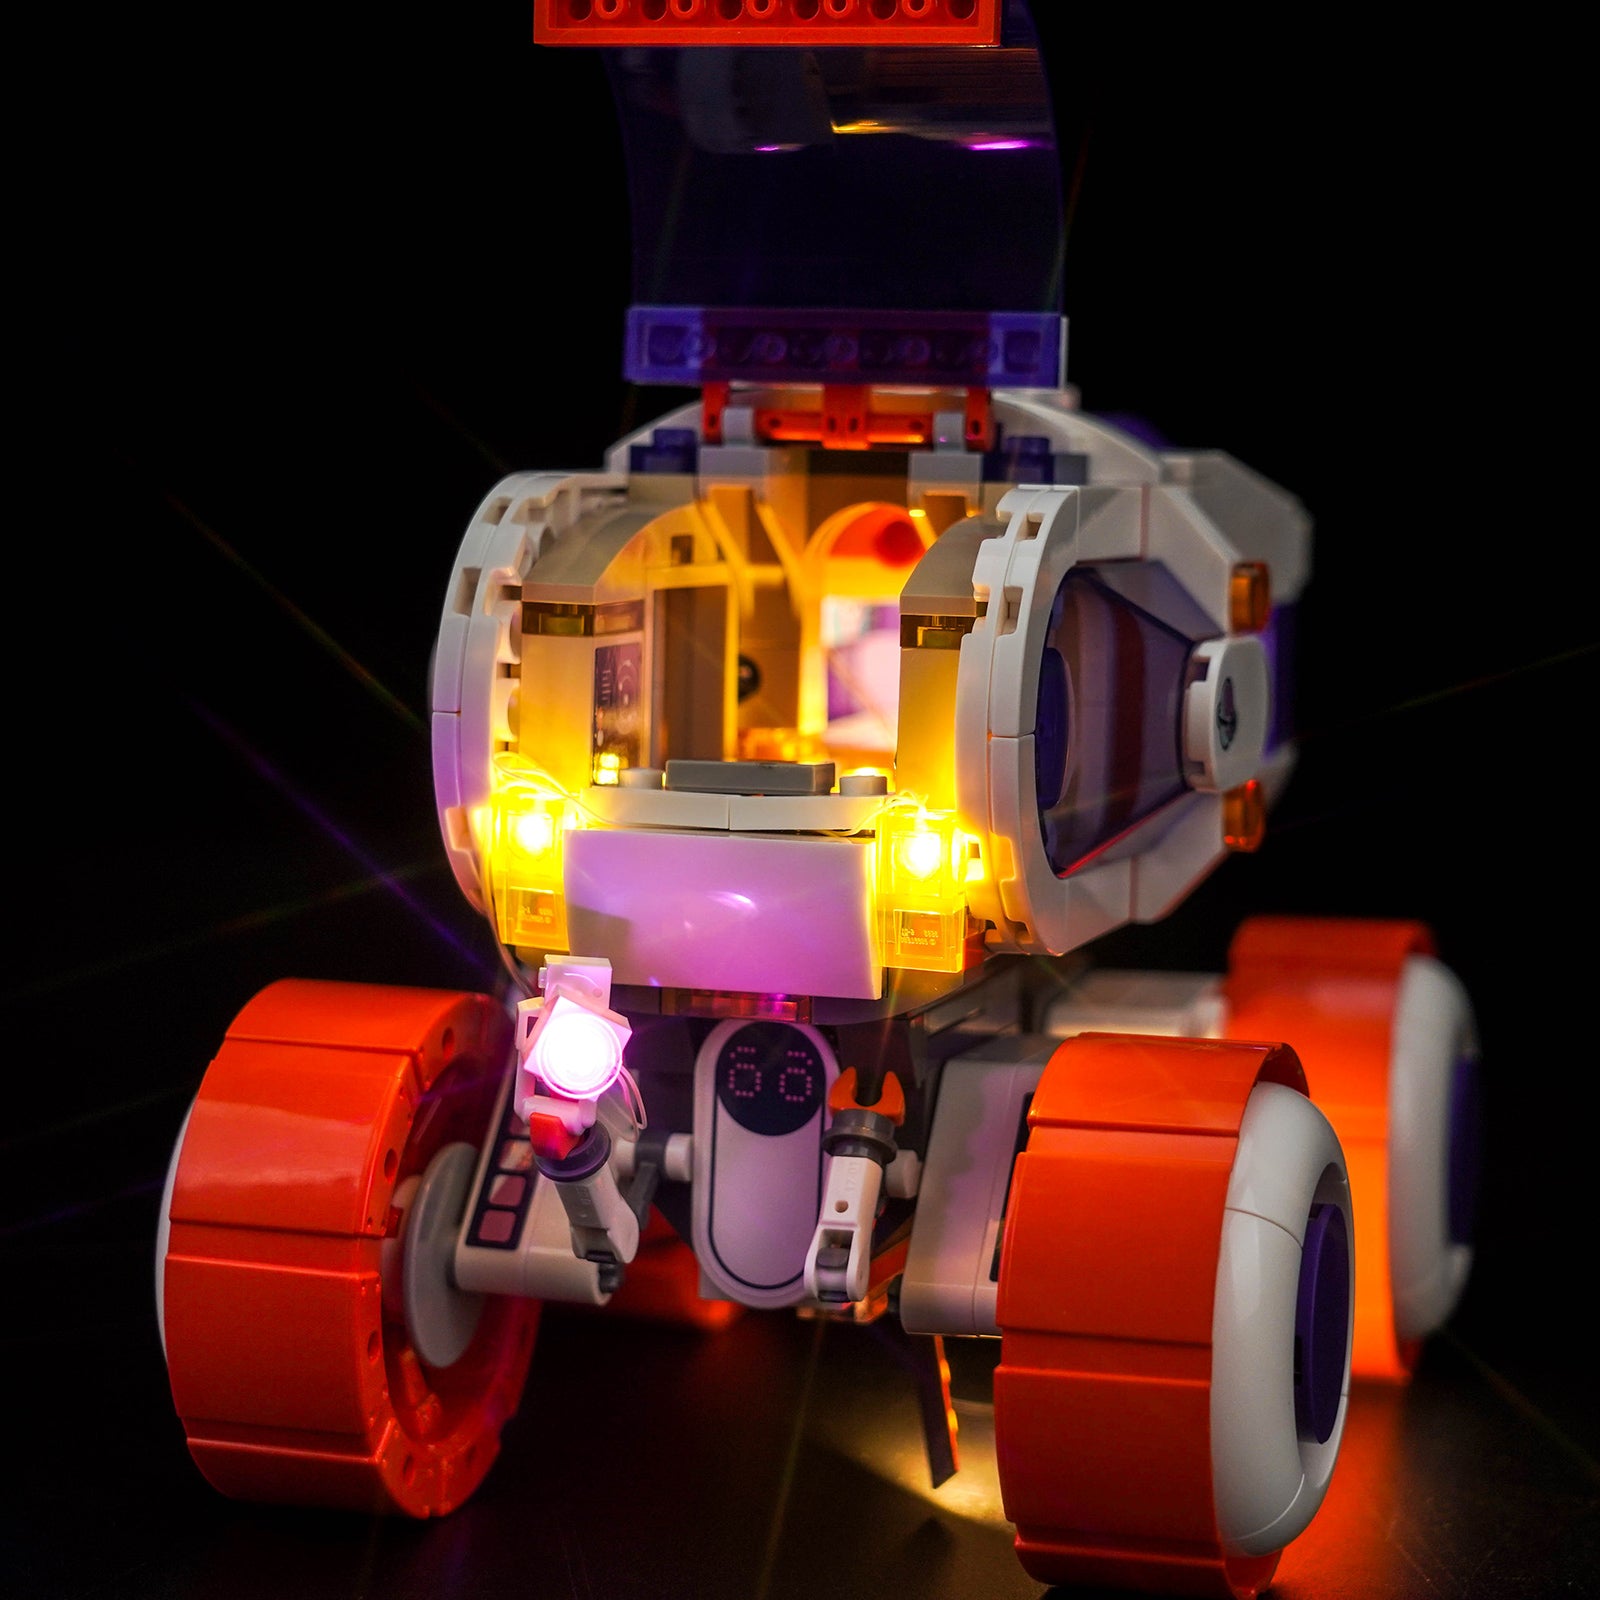 Lighting Effect Details Shown of BrickBling Light Kit for LEGO Space Research Rover 42602